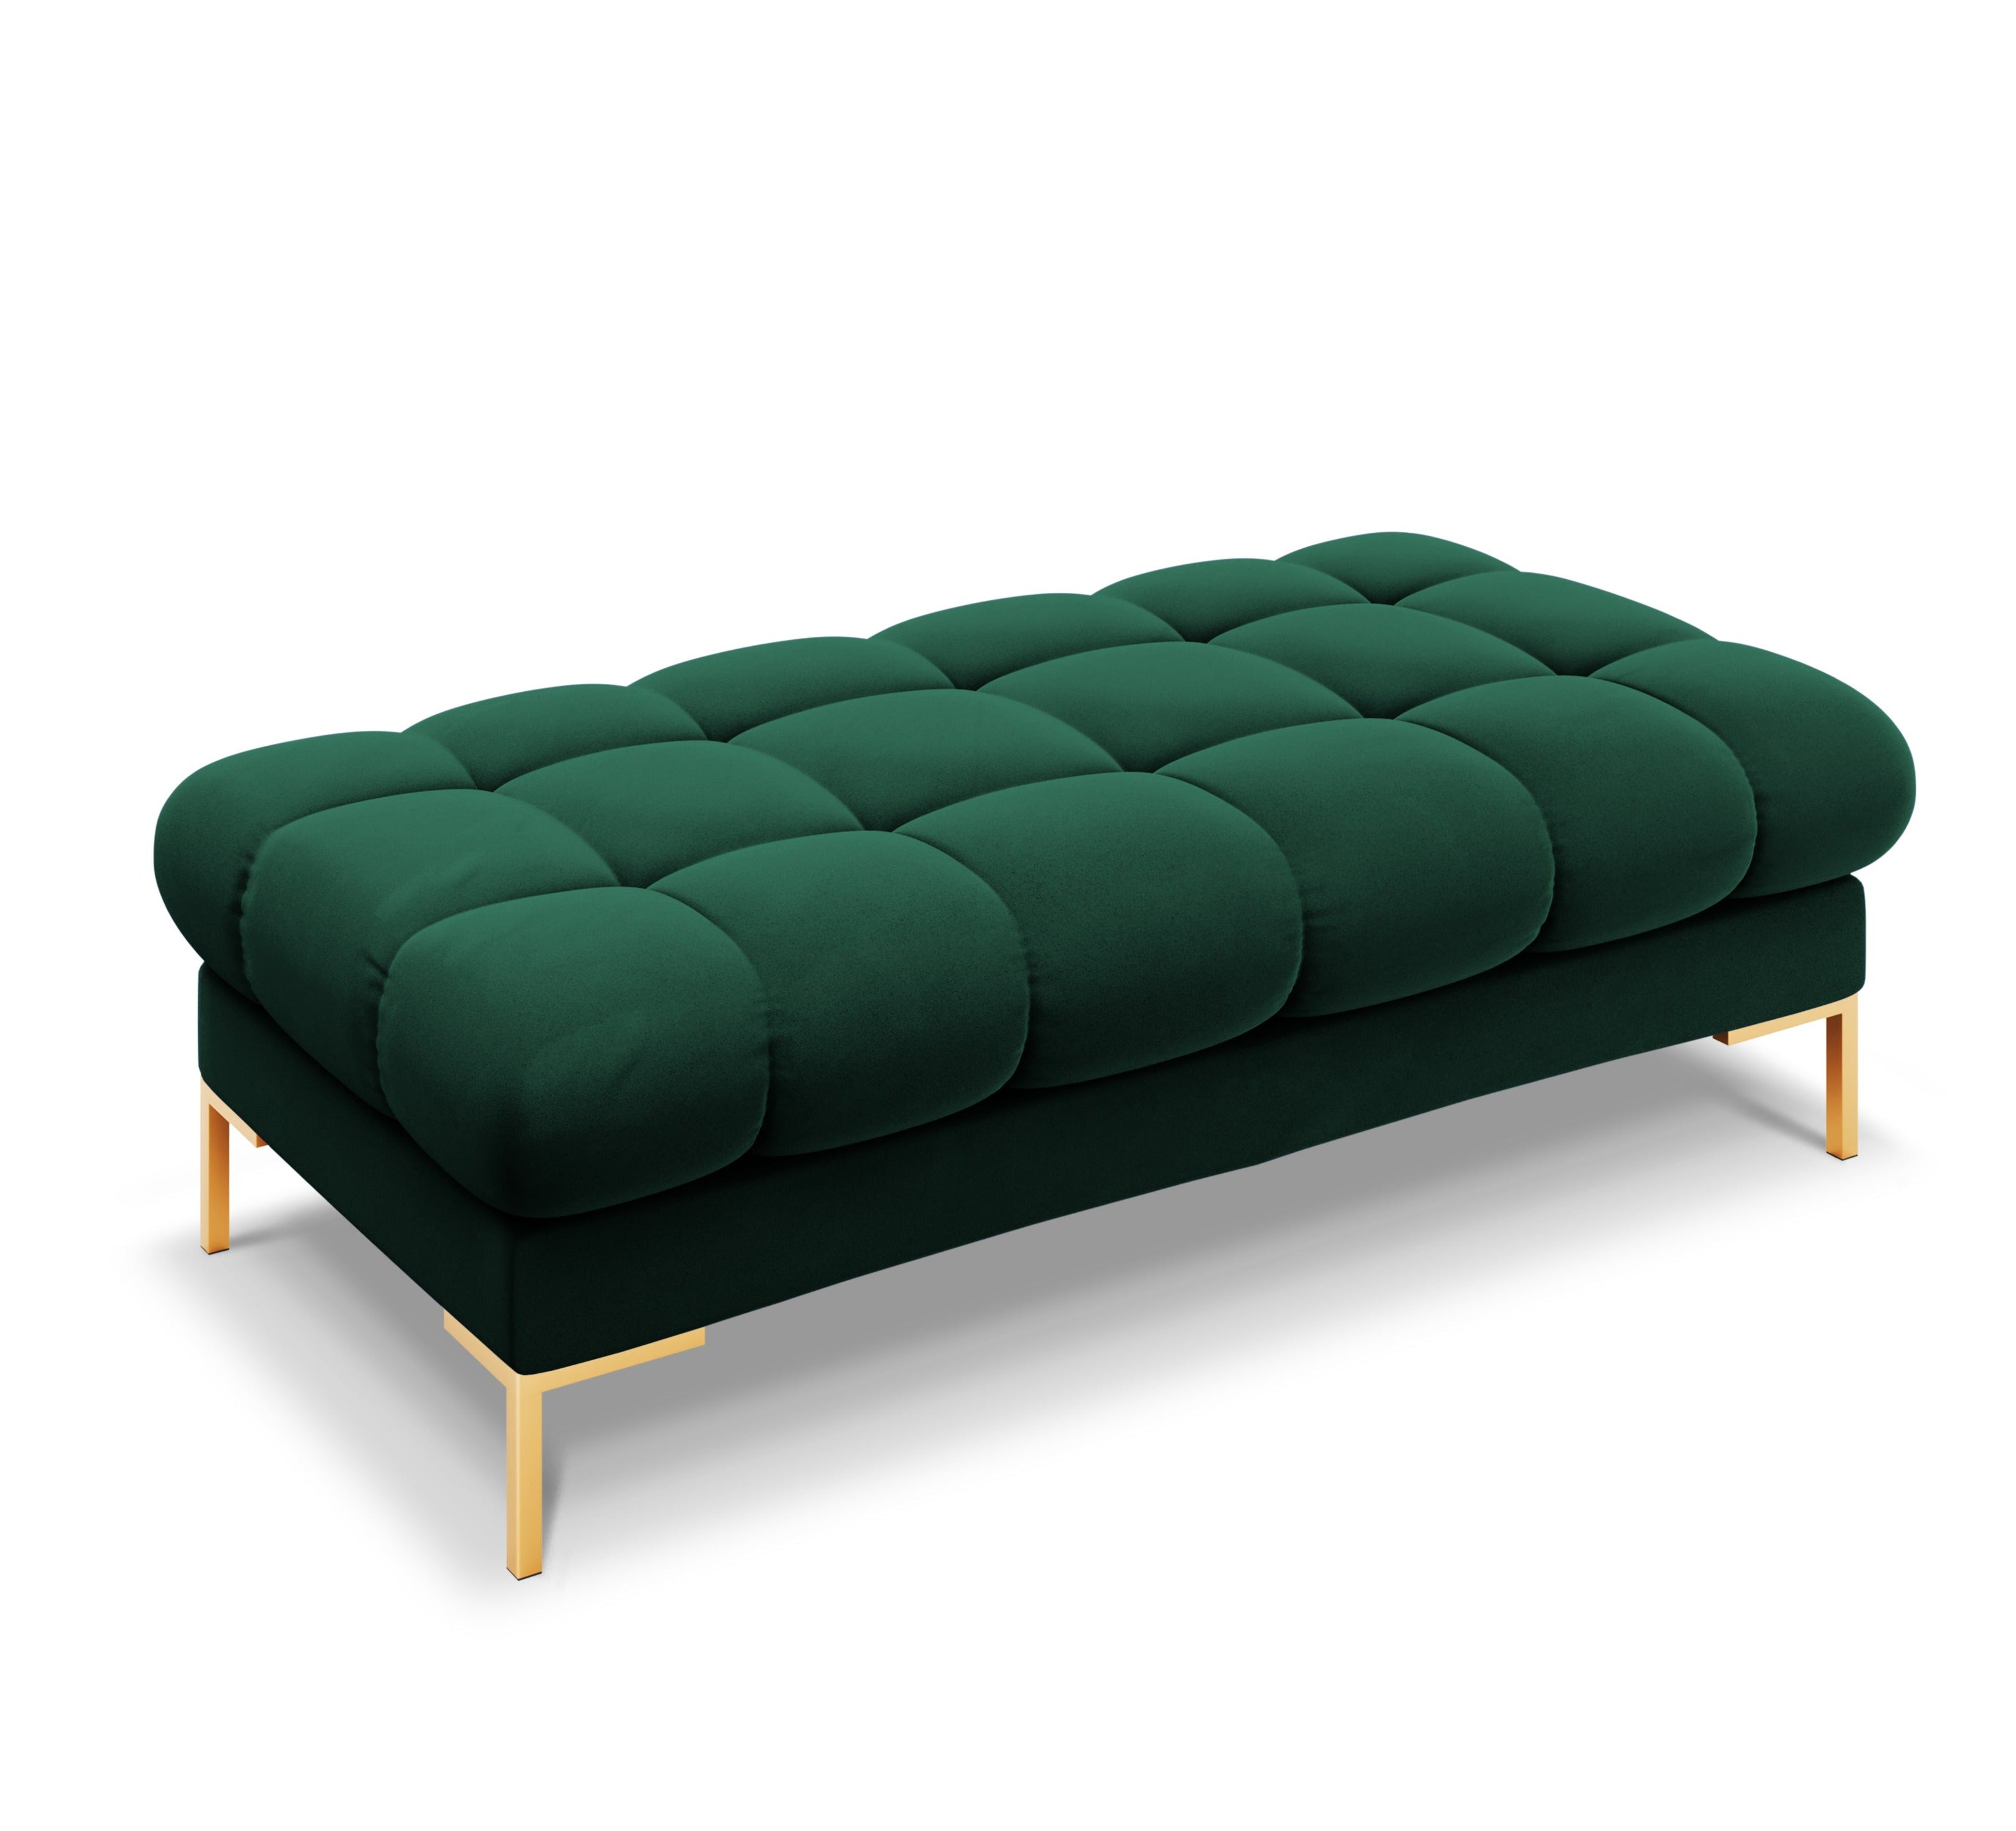 Green bench with a golden base